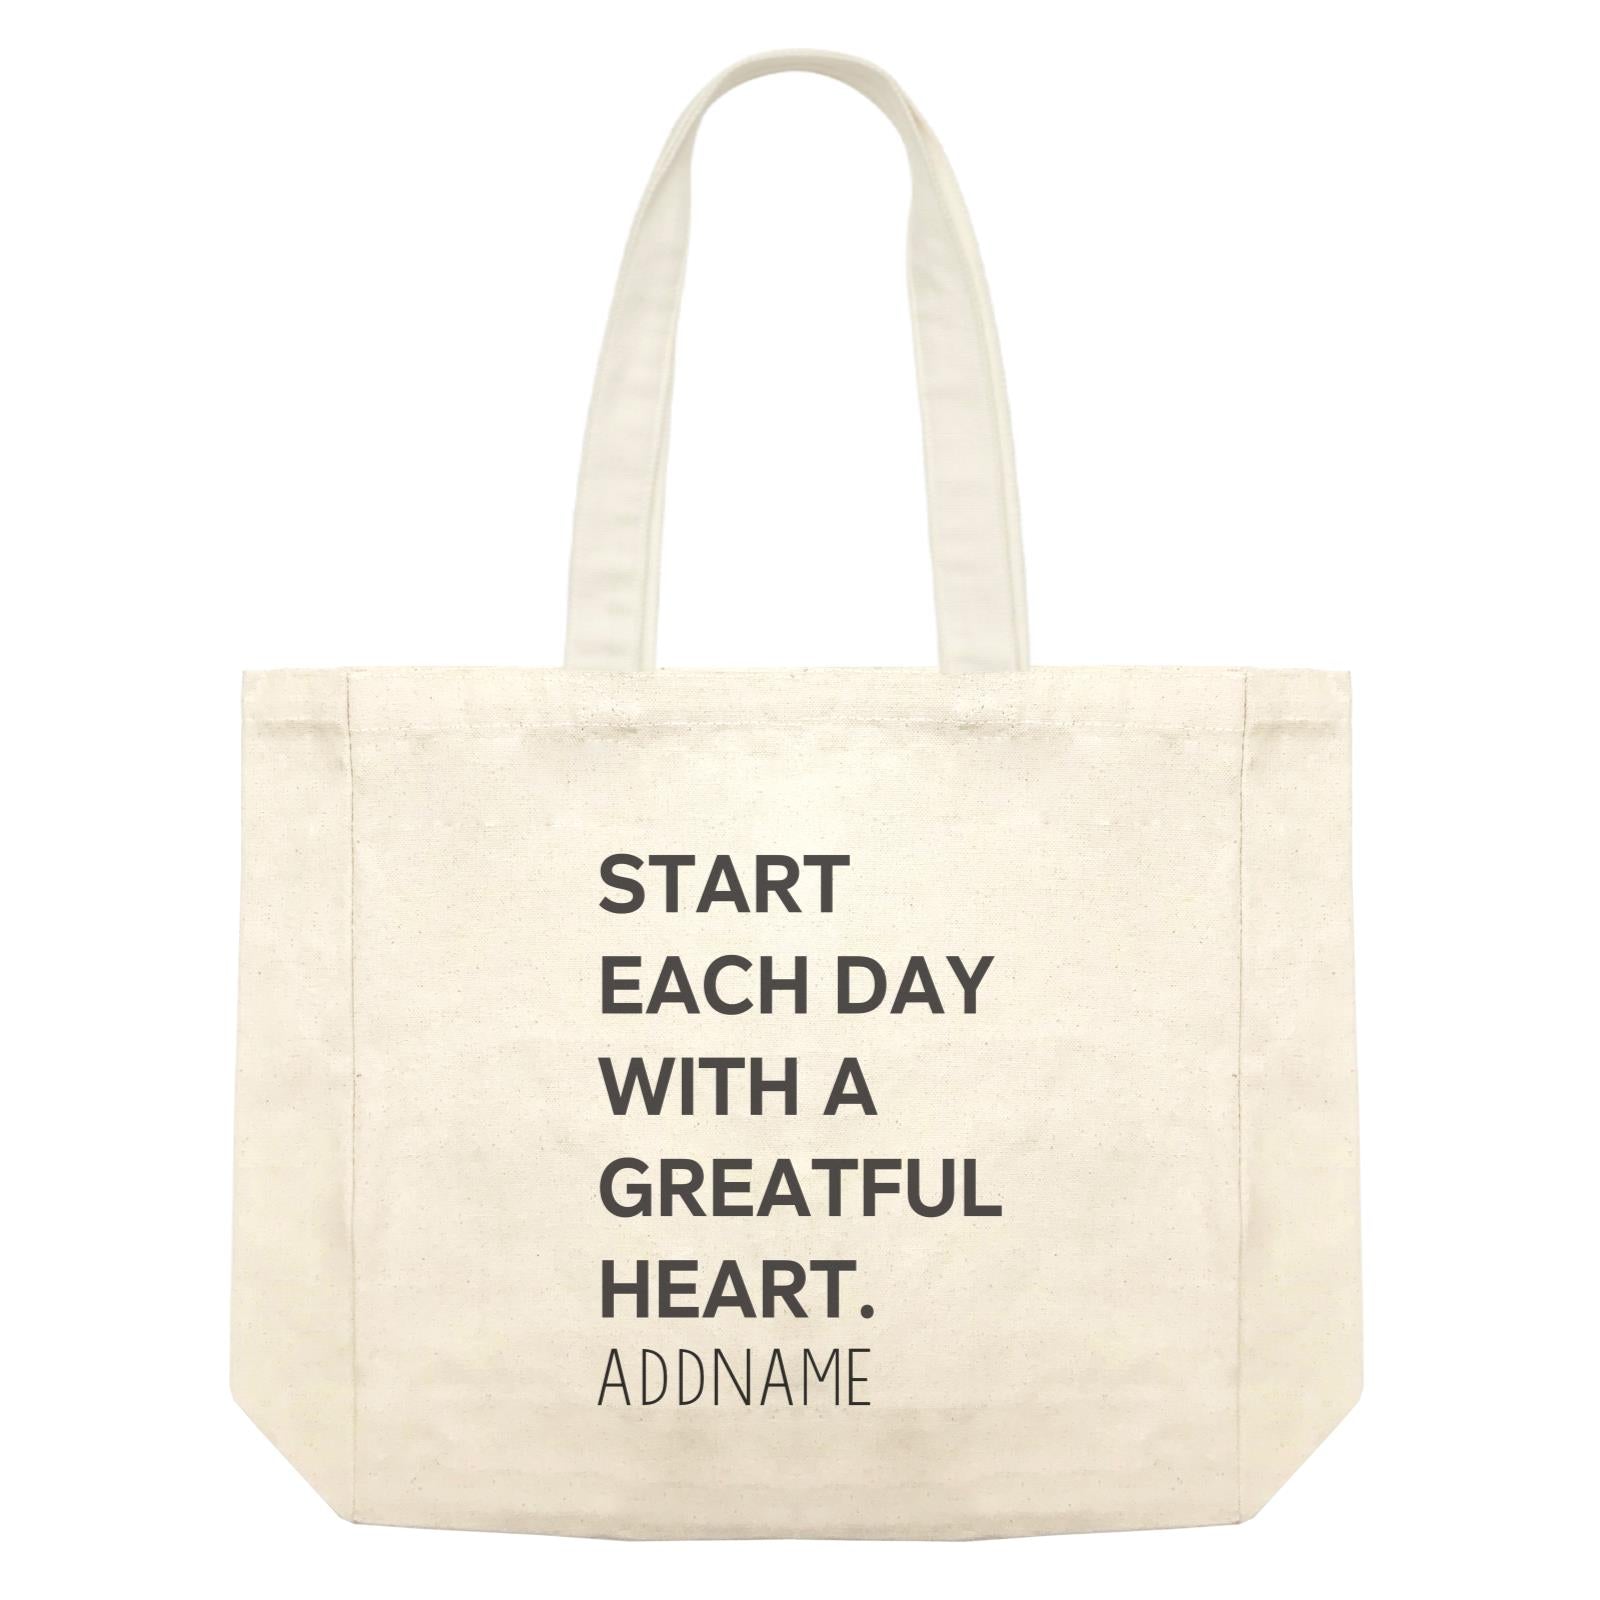 Inspiration Quotes Start Each Day With A Greatful Heart Addname Shopping Bag